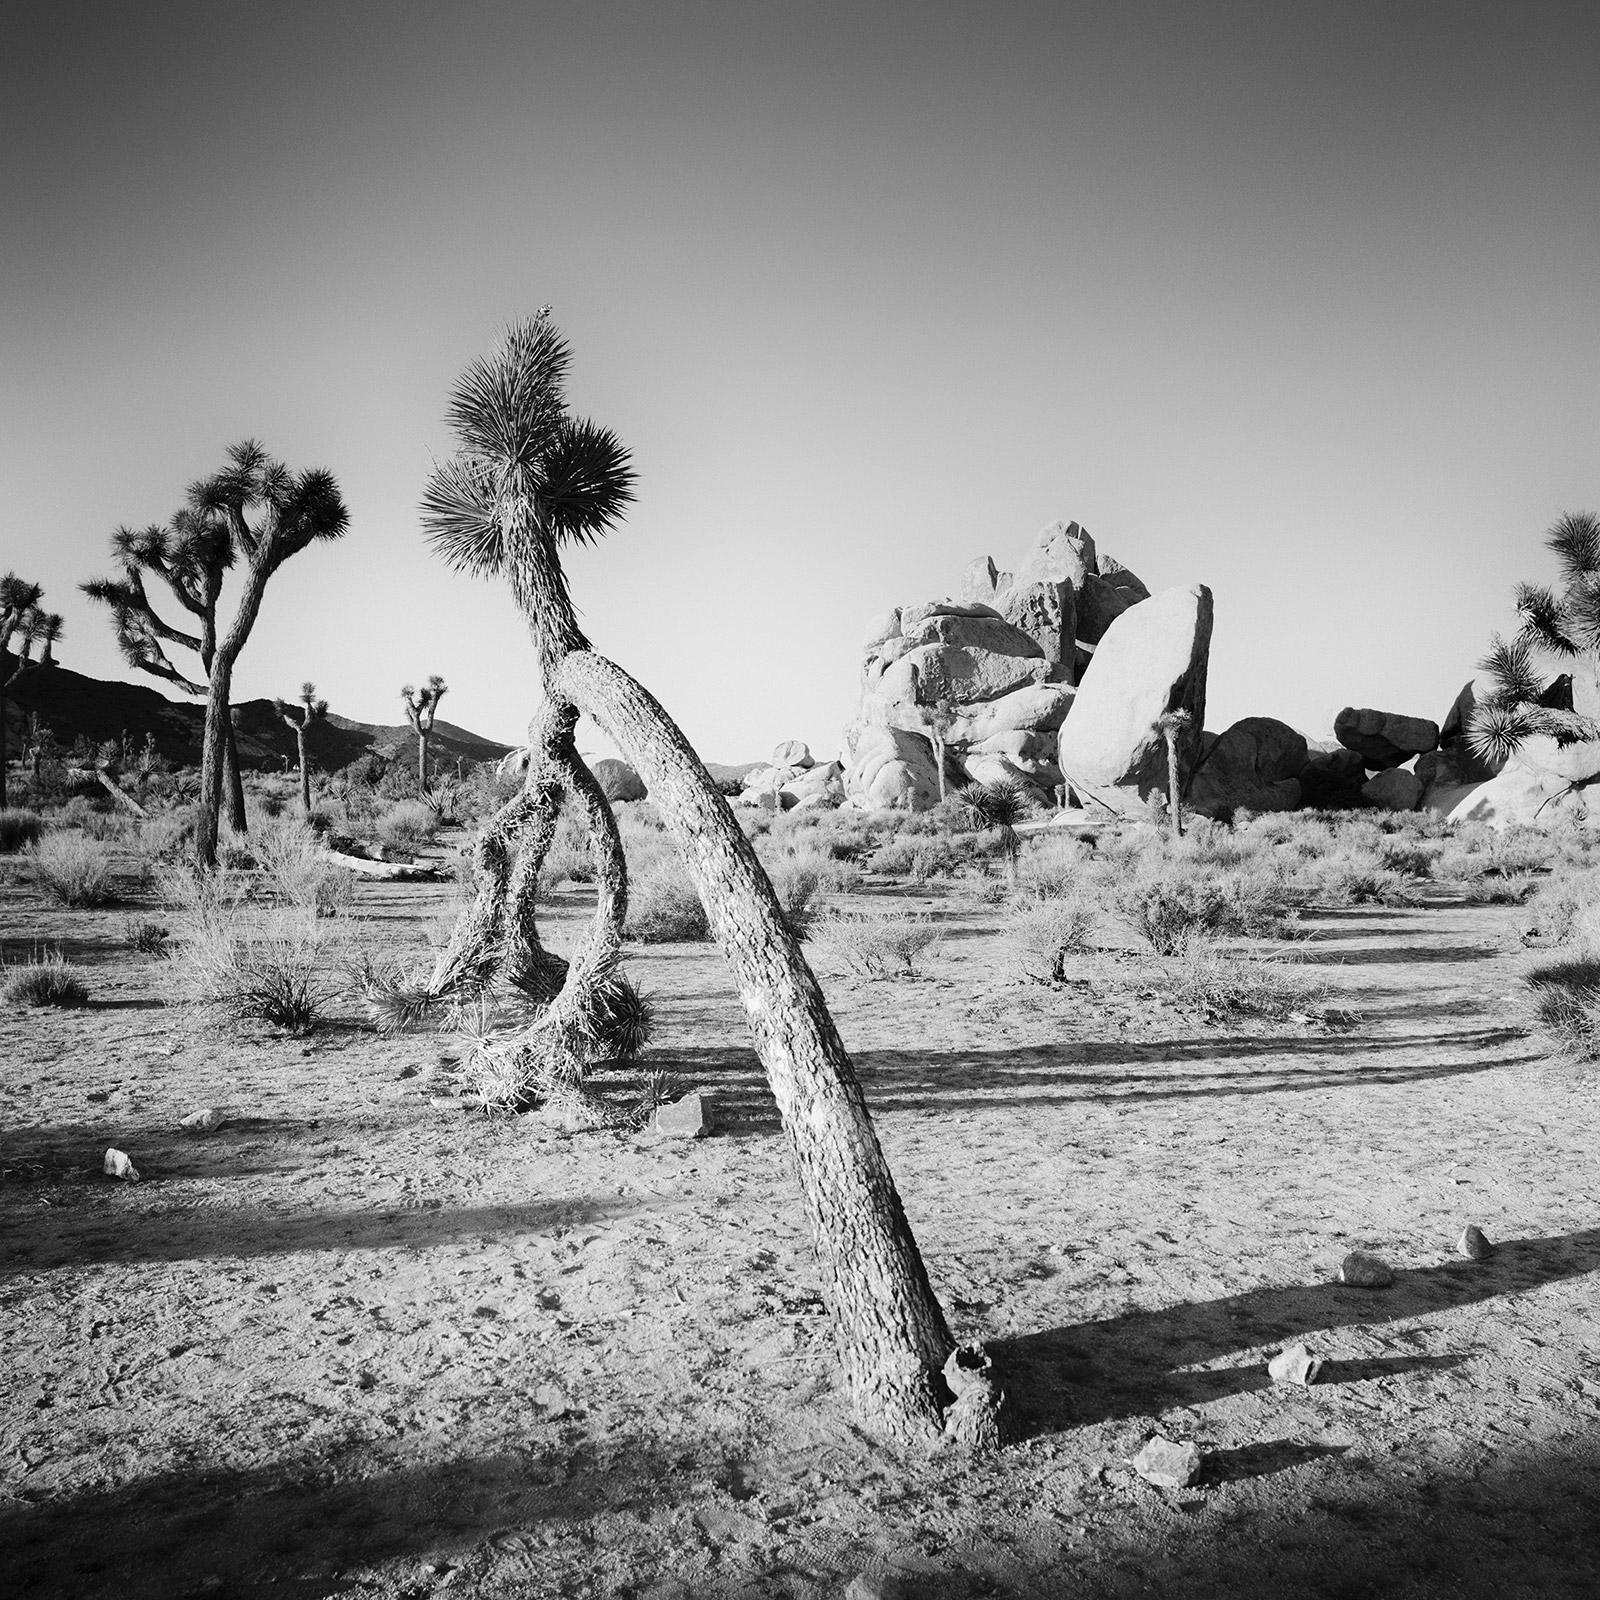 Gerald Berghammer Black and White Photograph - Curved Joshua Tree in Desert, California, black and white photography, landscape